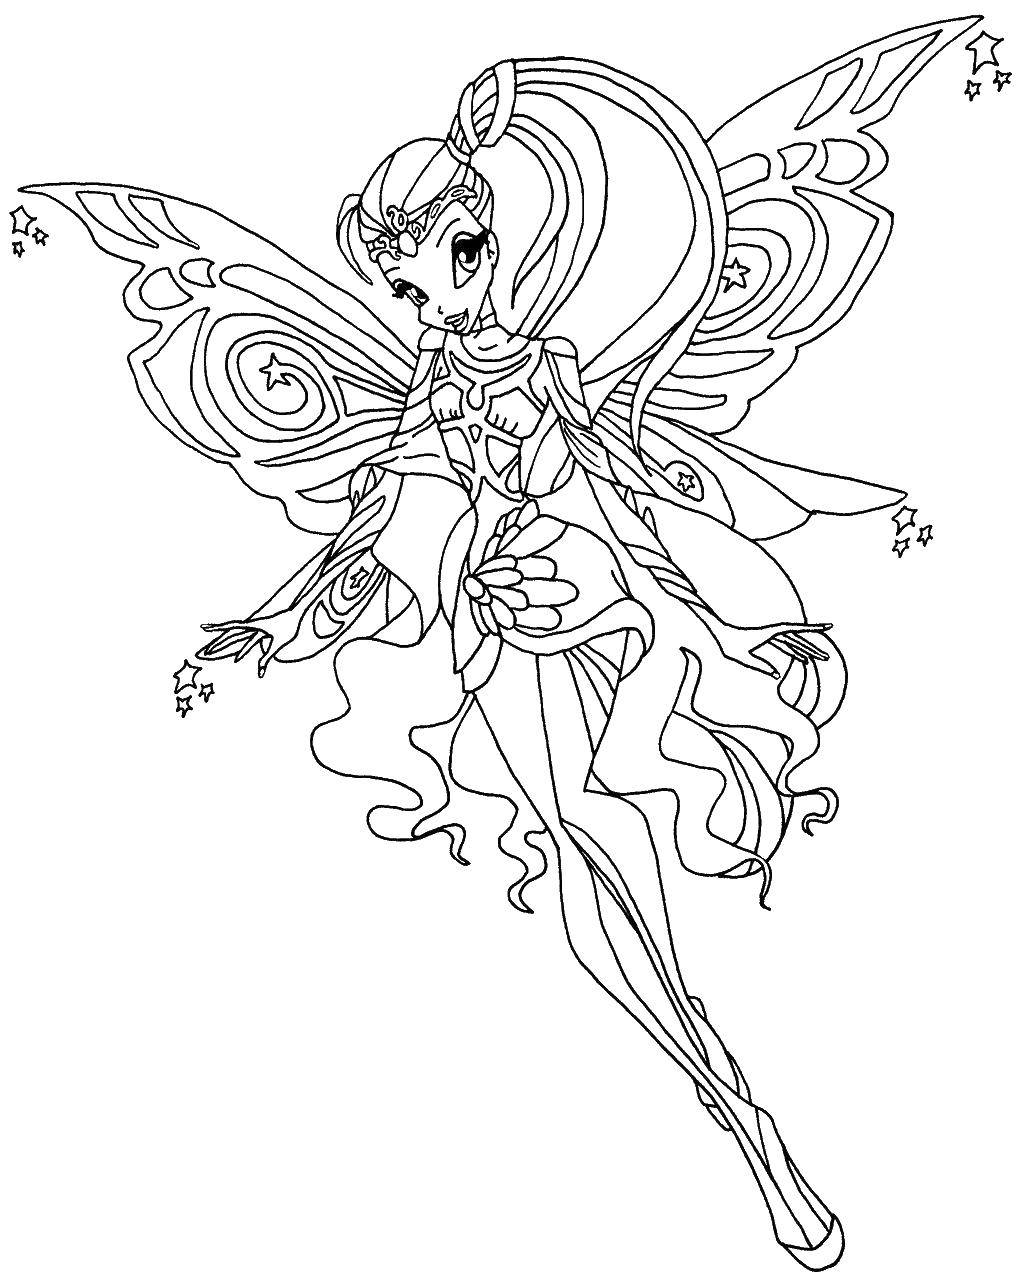 Coloring Fairy from winx club. Category Winx club. Tags:  Fairy, club, winx.